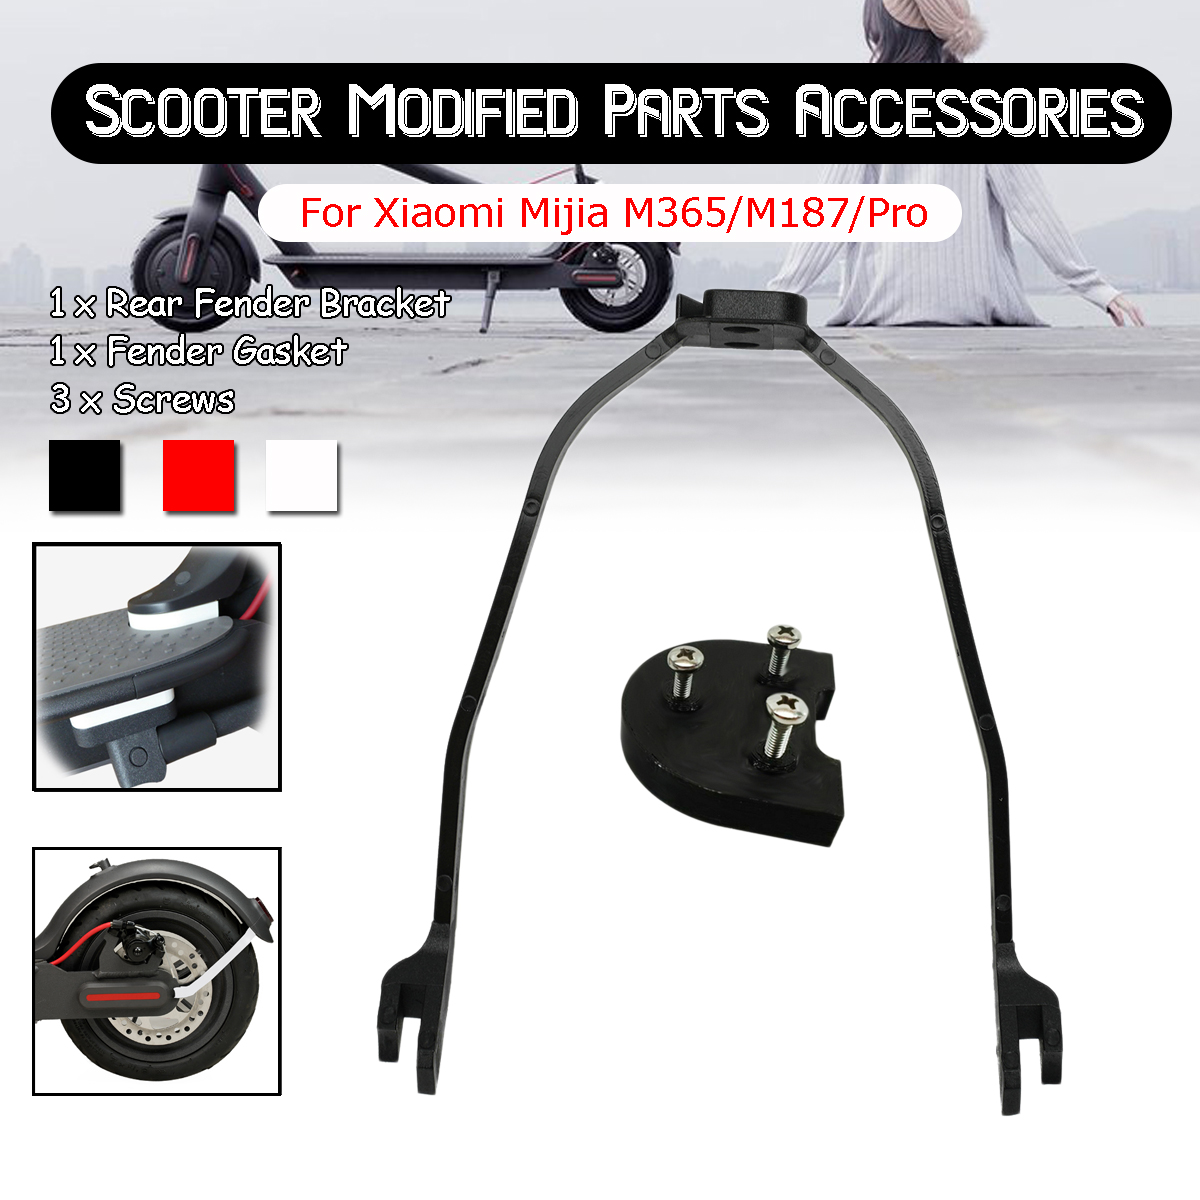 Wheels Upgrade Modified Accessory Part For Xiaomi Mijia M365/M187/Pro Scooter